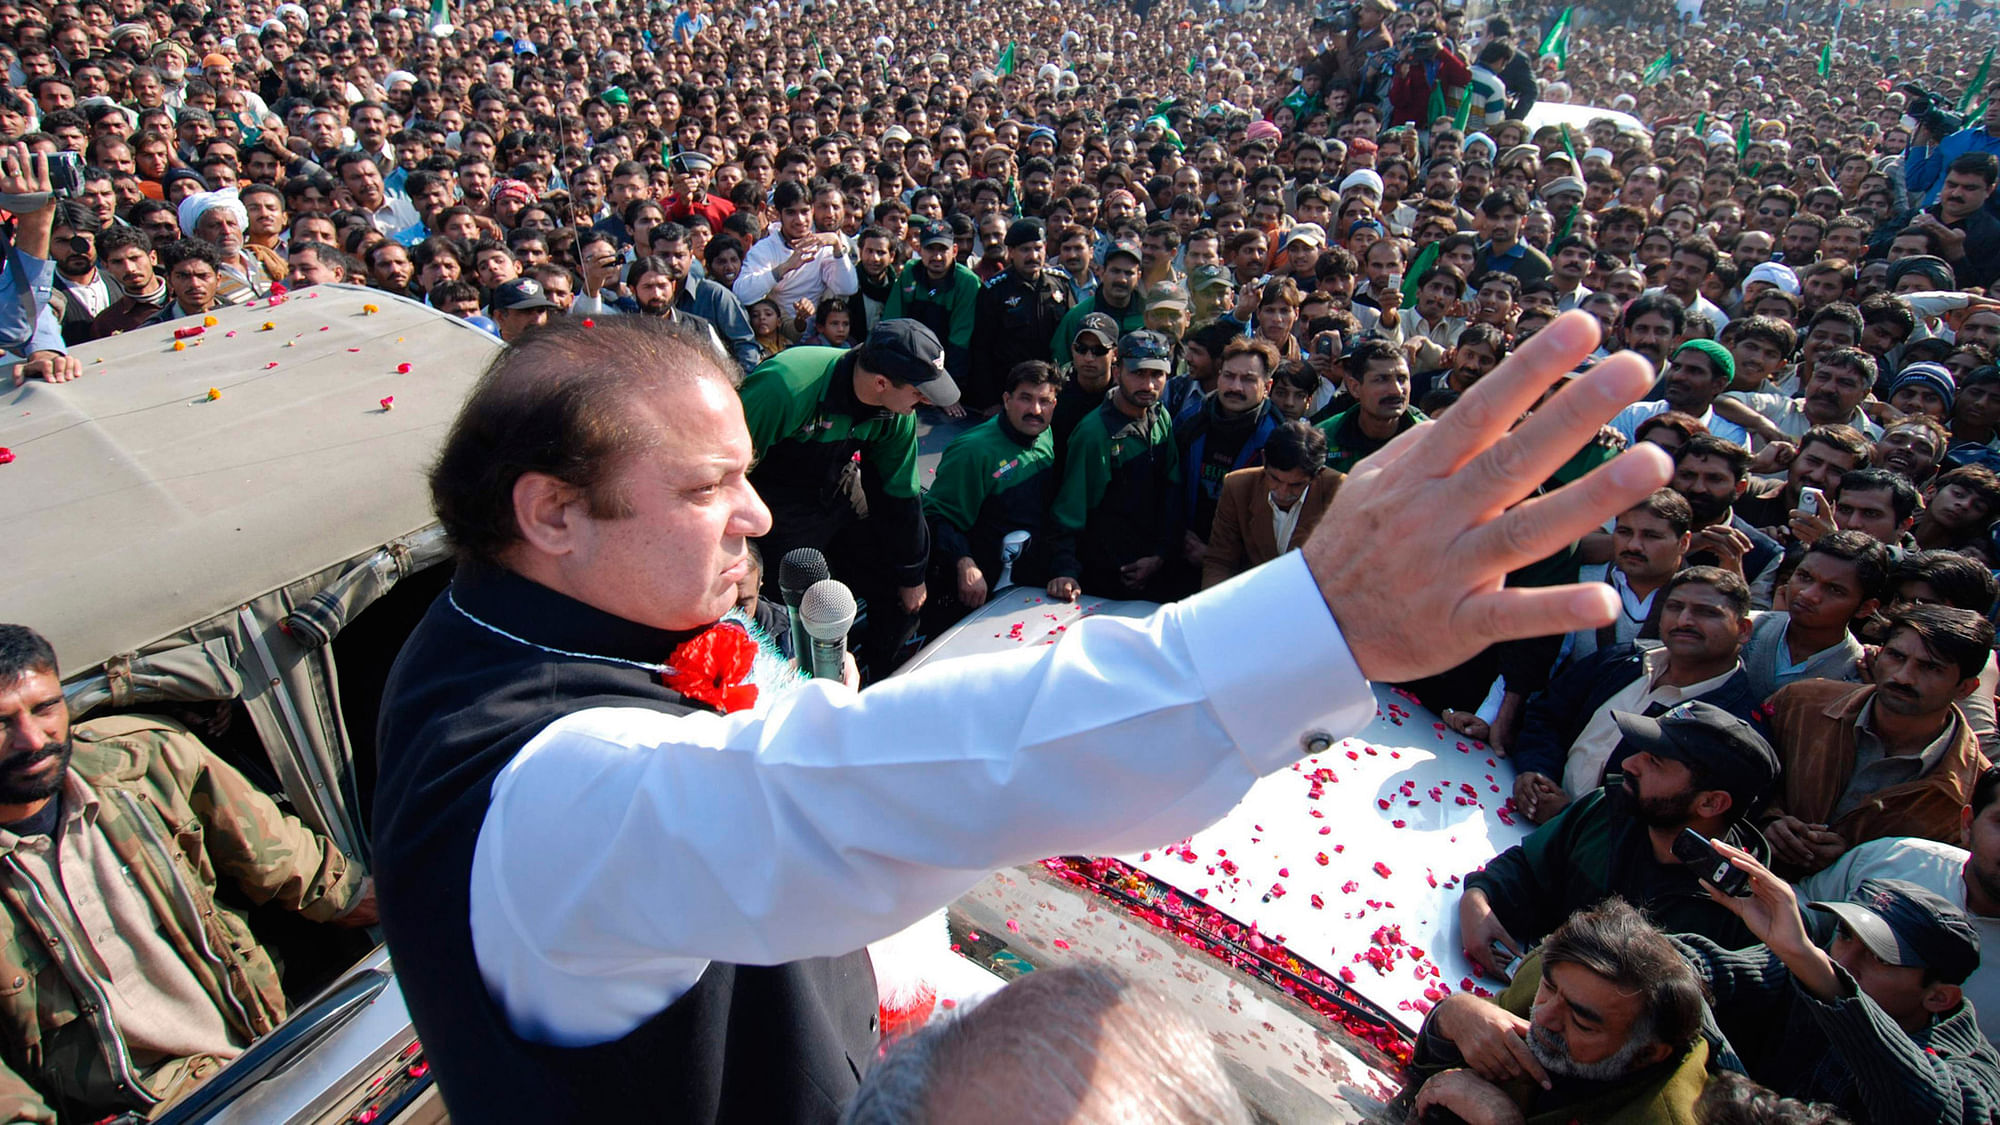 Pakistan Prime Minister Nawaz Sharif waves to his supporters. (Photo: Reuters)